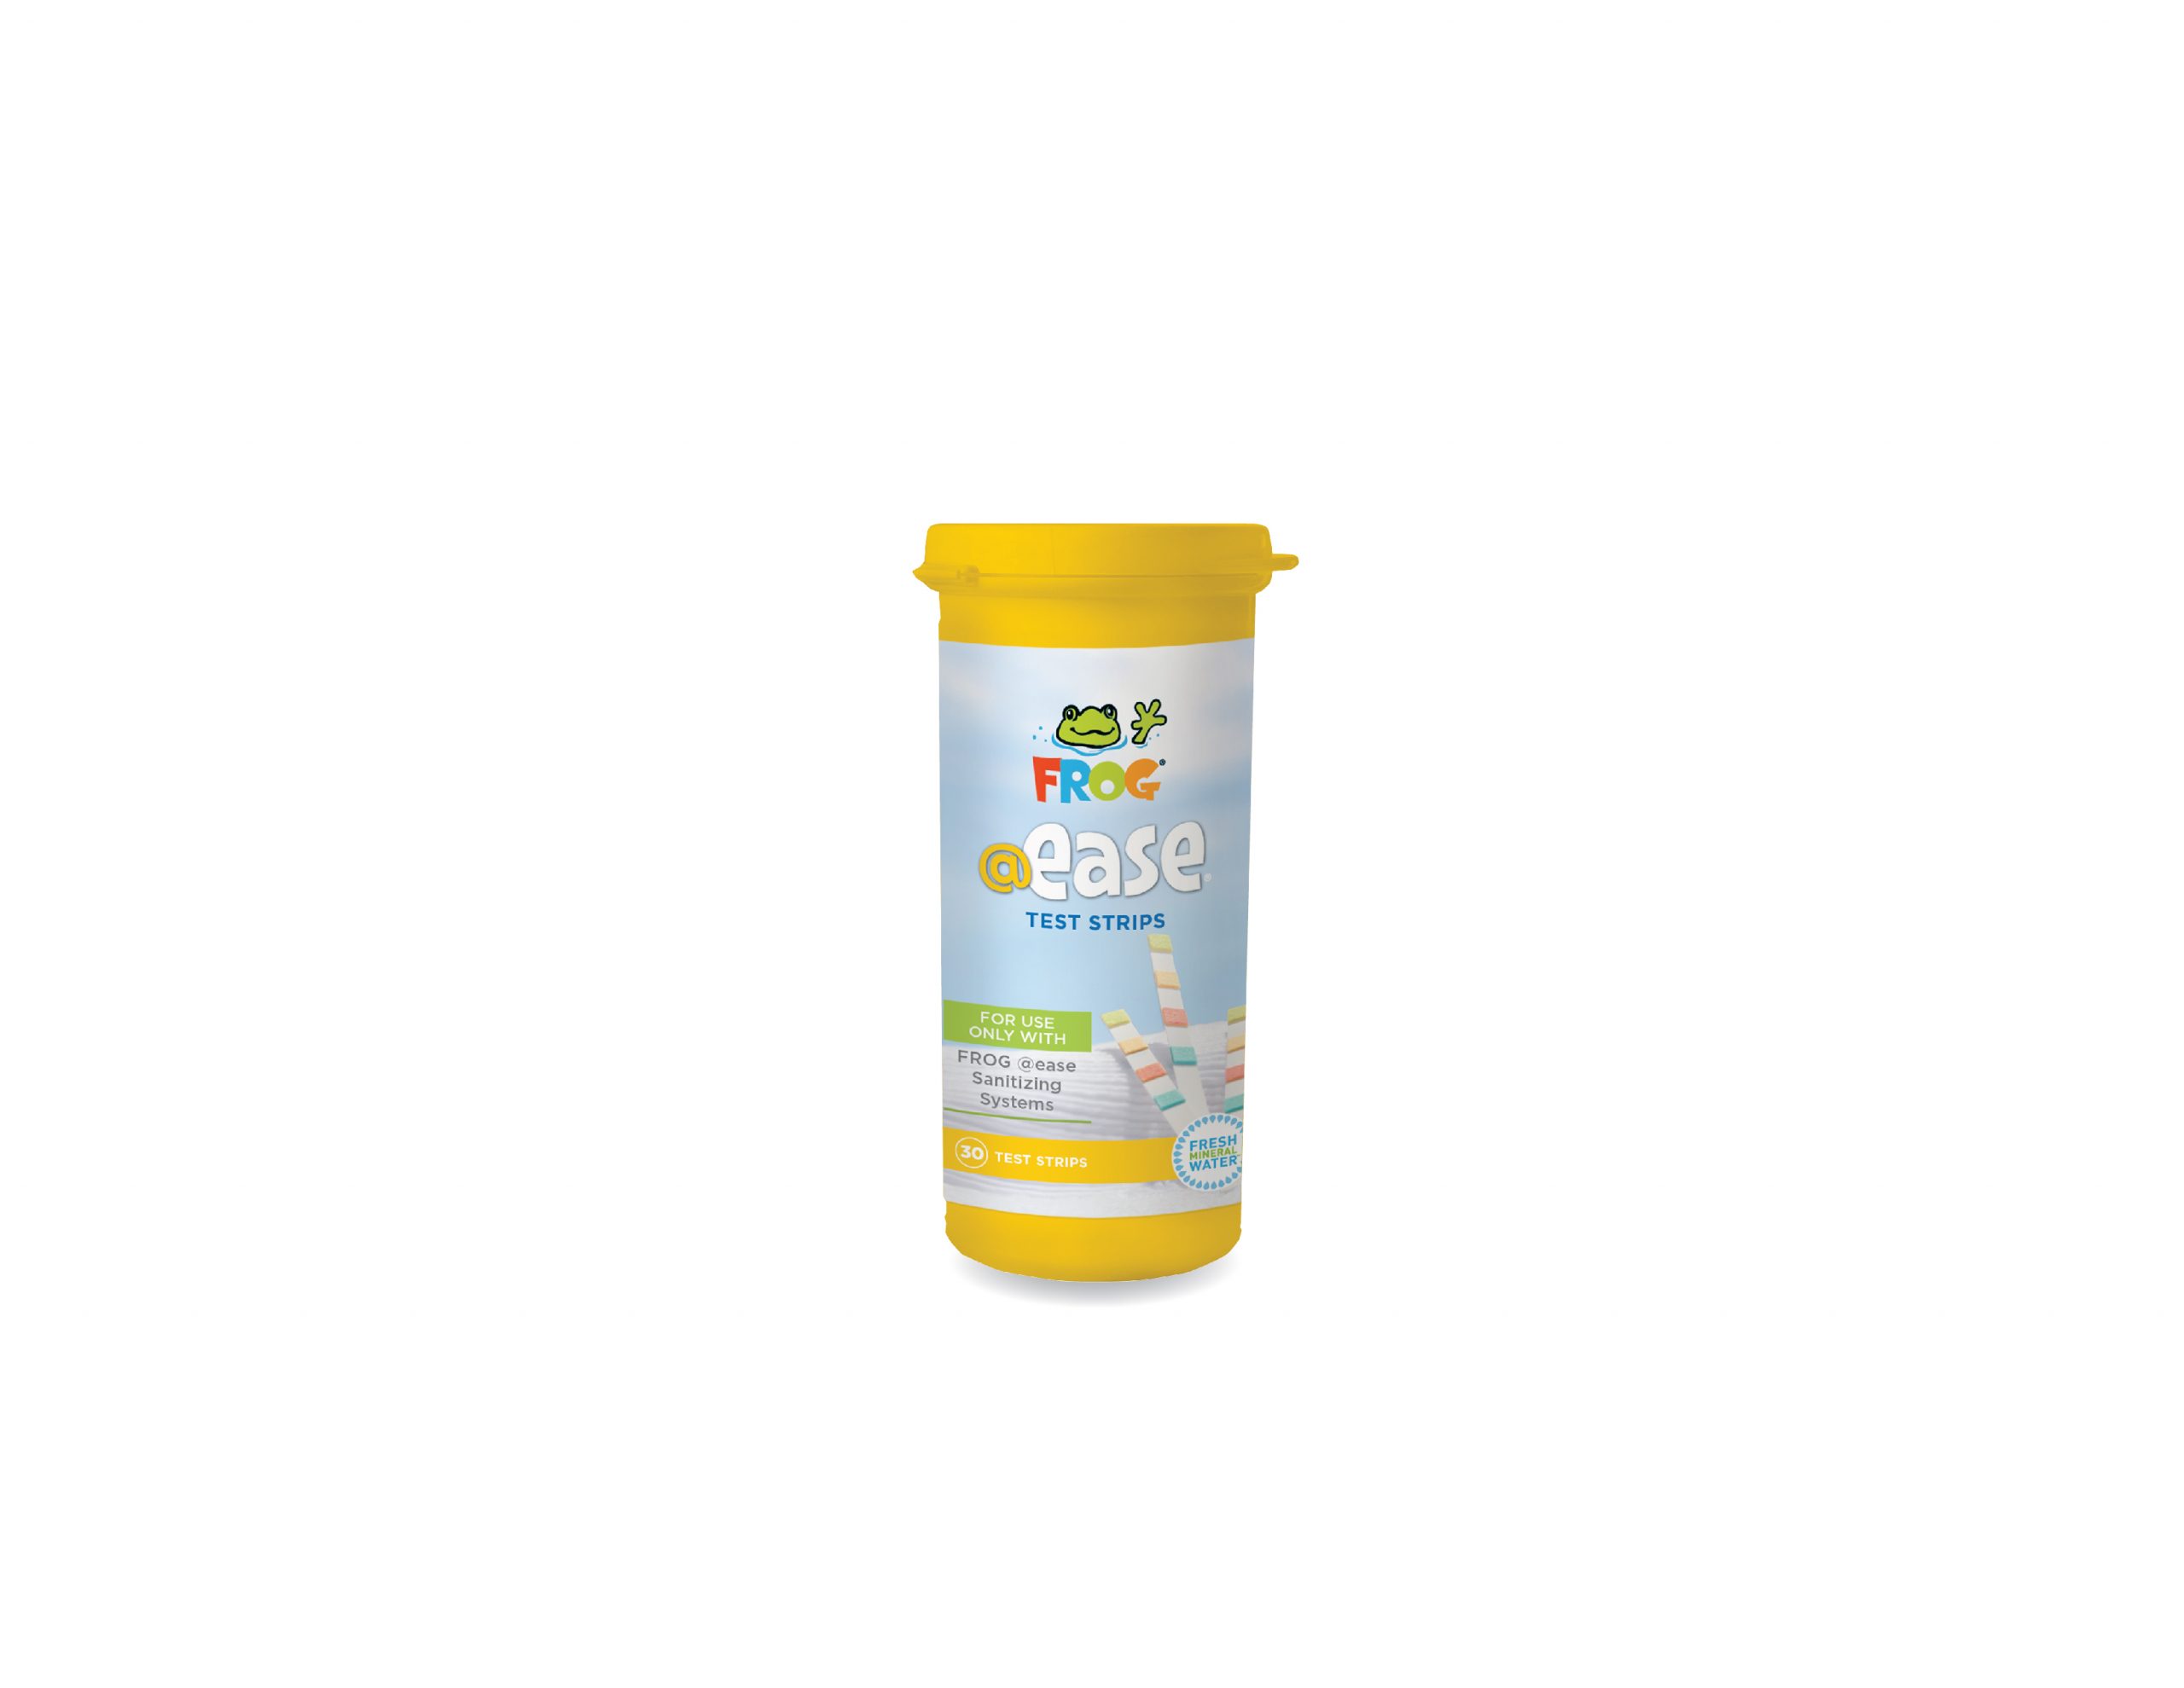 Ease Test Strips 30 Count Bottle - CLEARANCE SAFETY COVERS